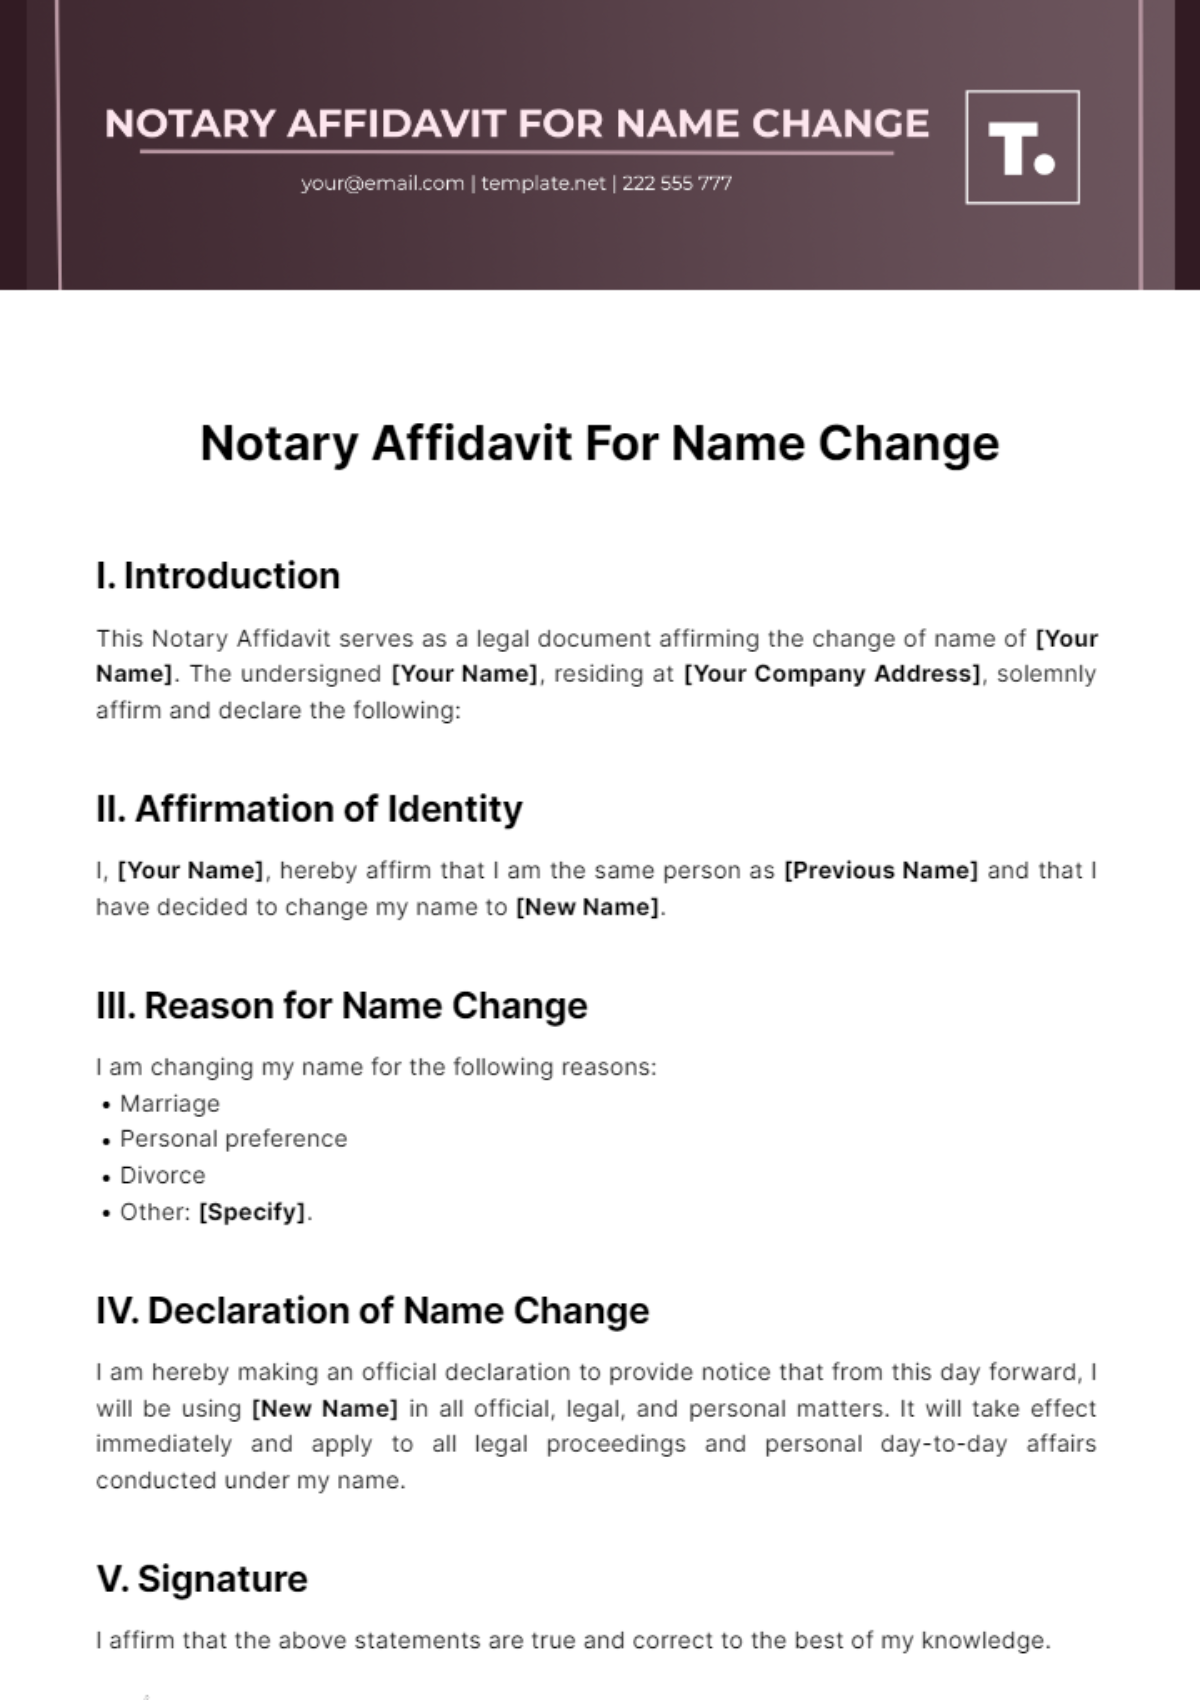 Notary Affidavit For Name Change Template